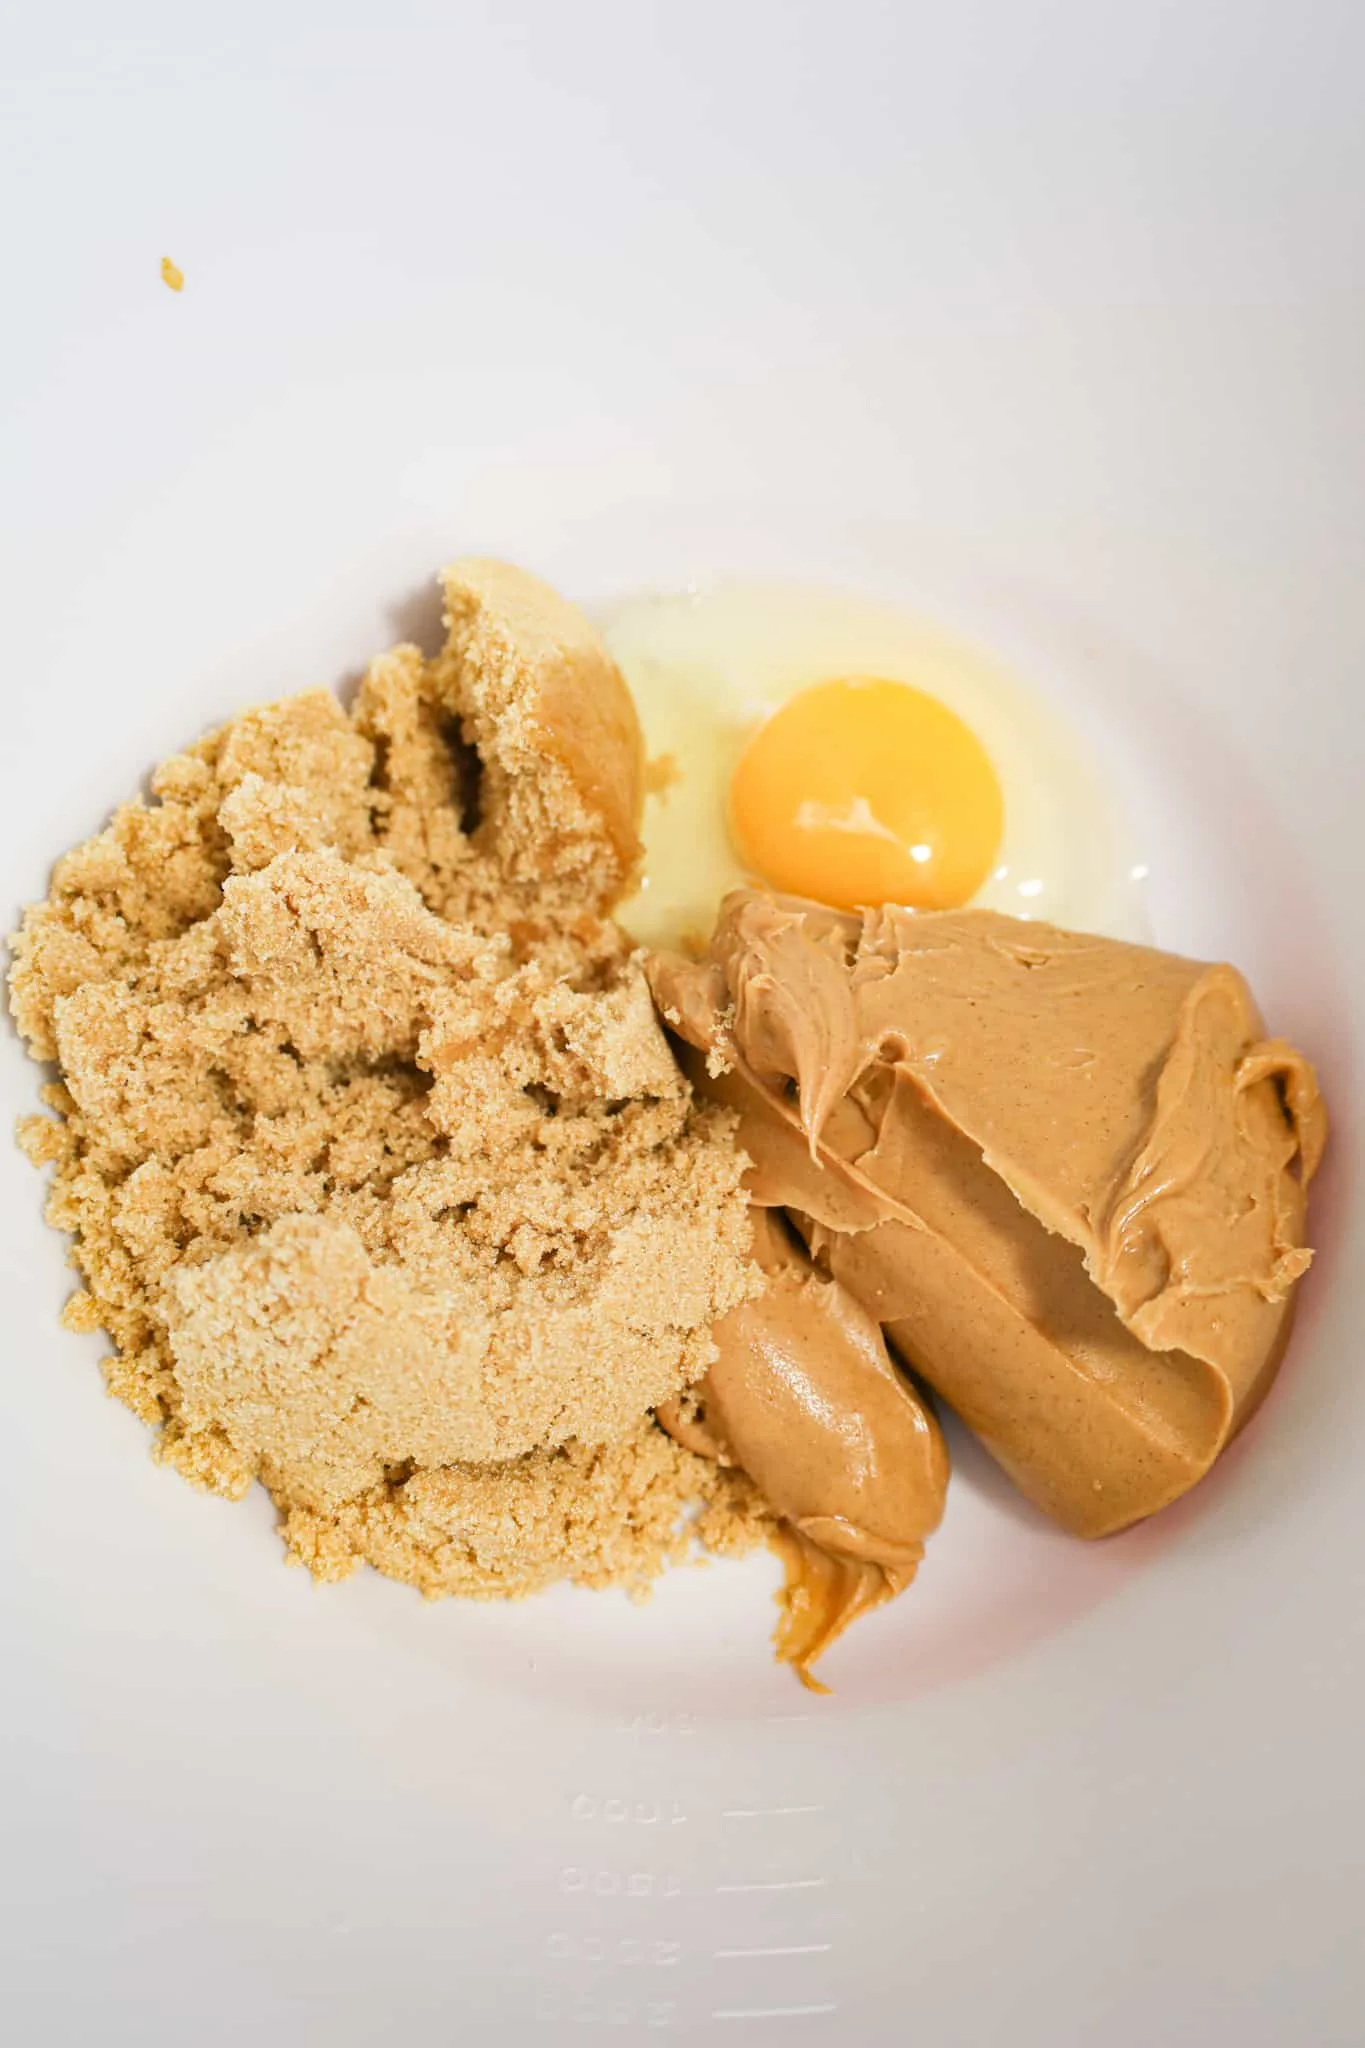 light brown sugar, smooth peanut butter and an egg in the mixing bowl